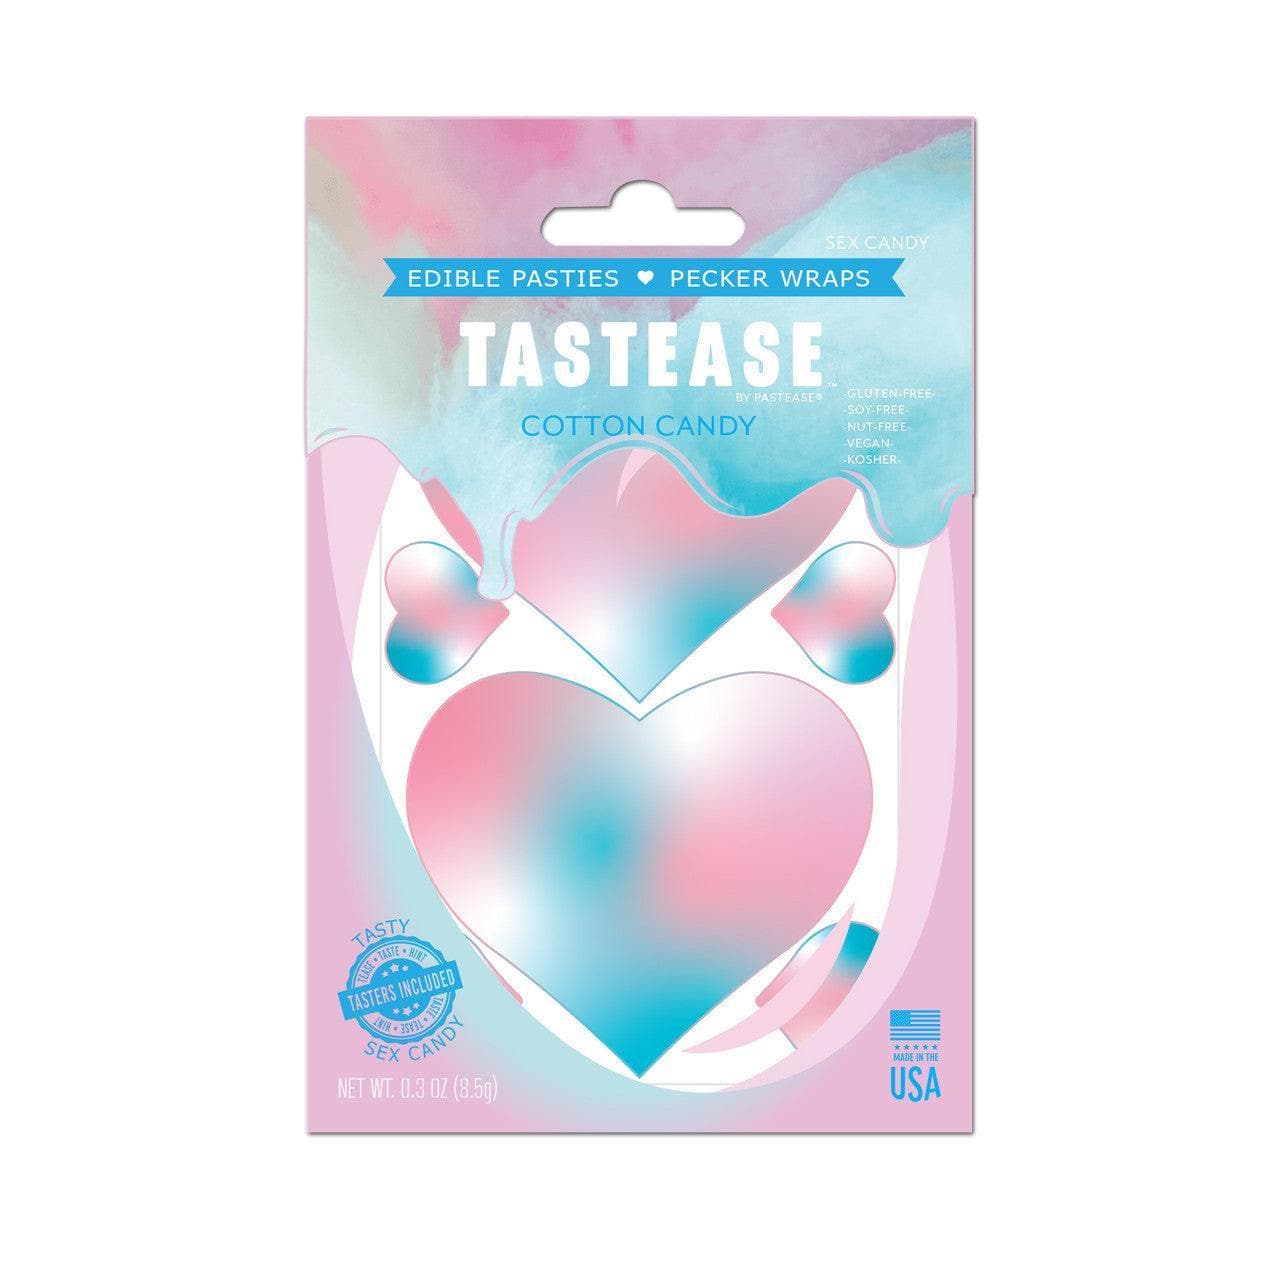 Tastease by Pastease Cotton Candy Edible Pasties & Pecker Wraps - Romantic Blessings